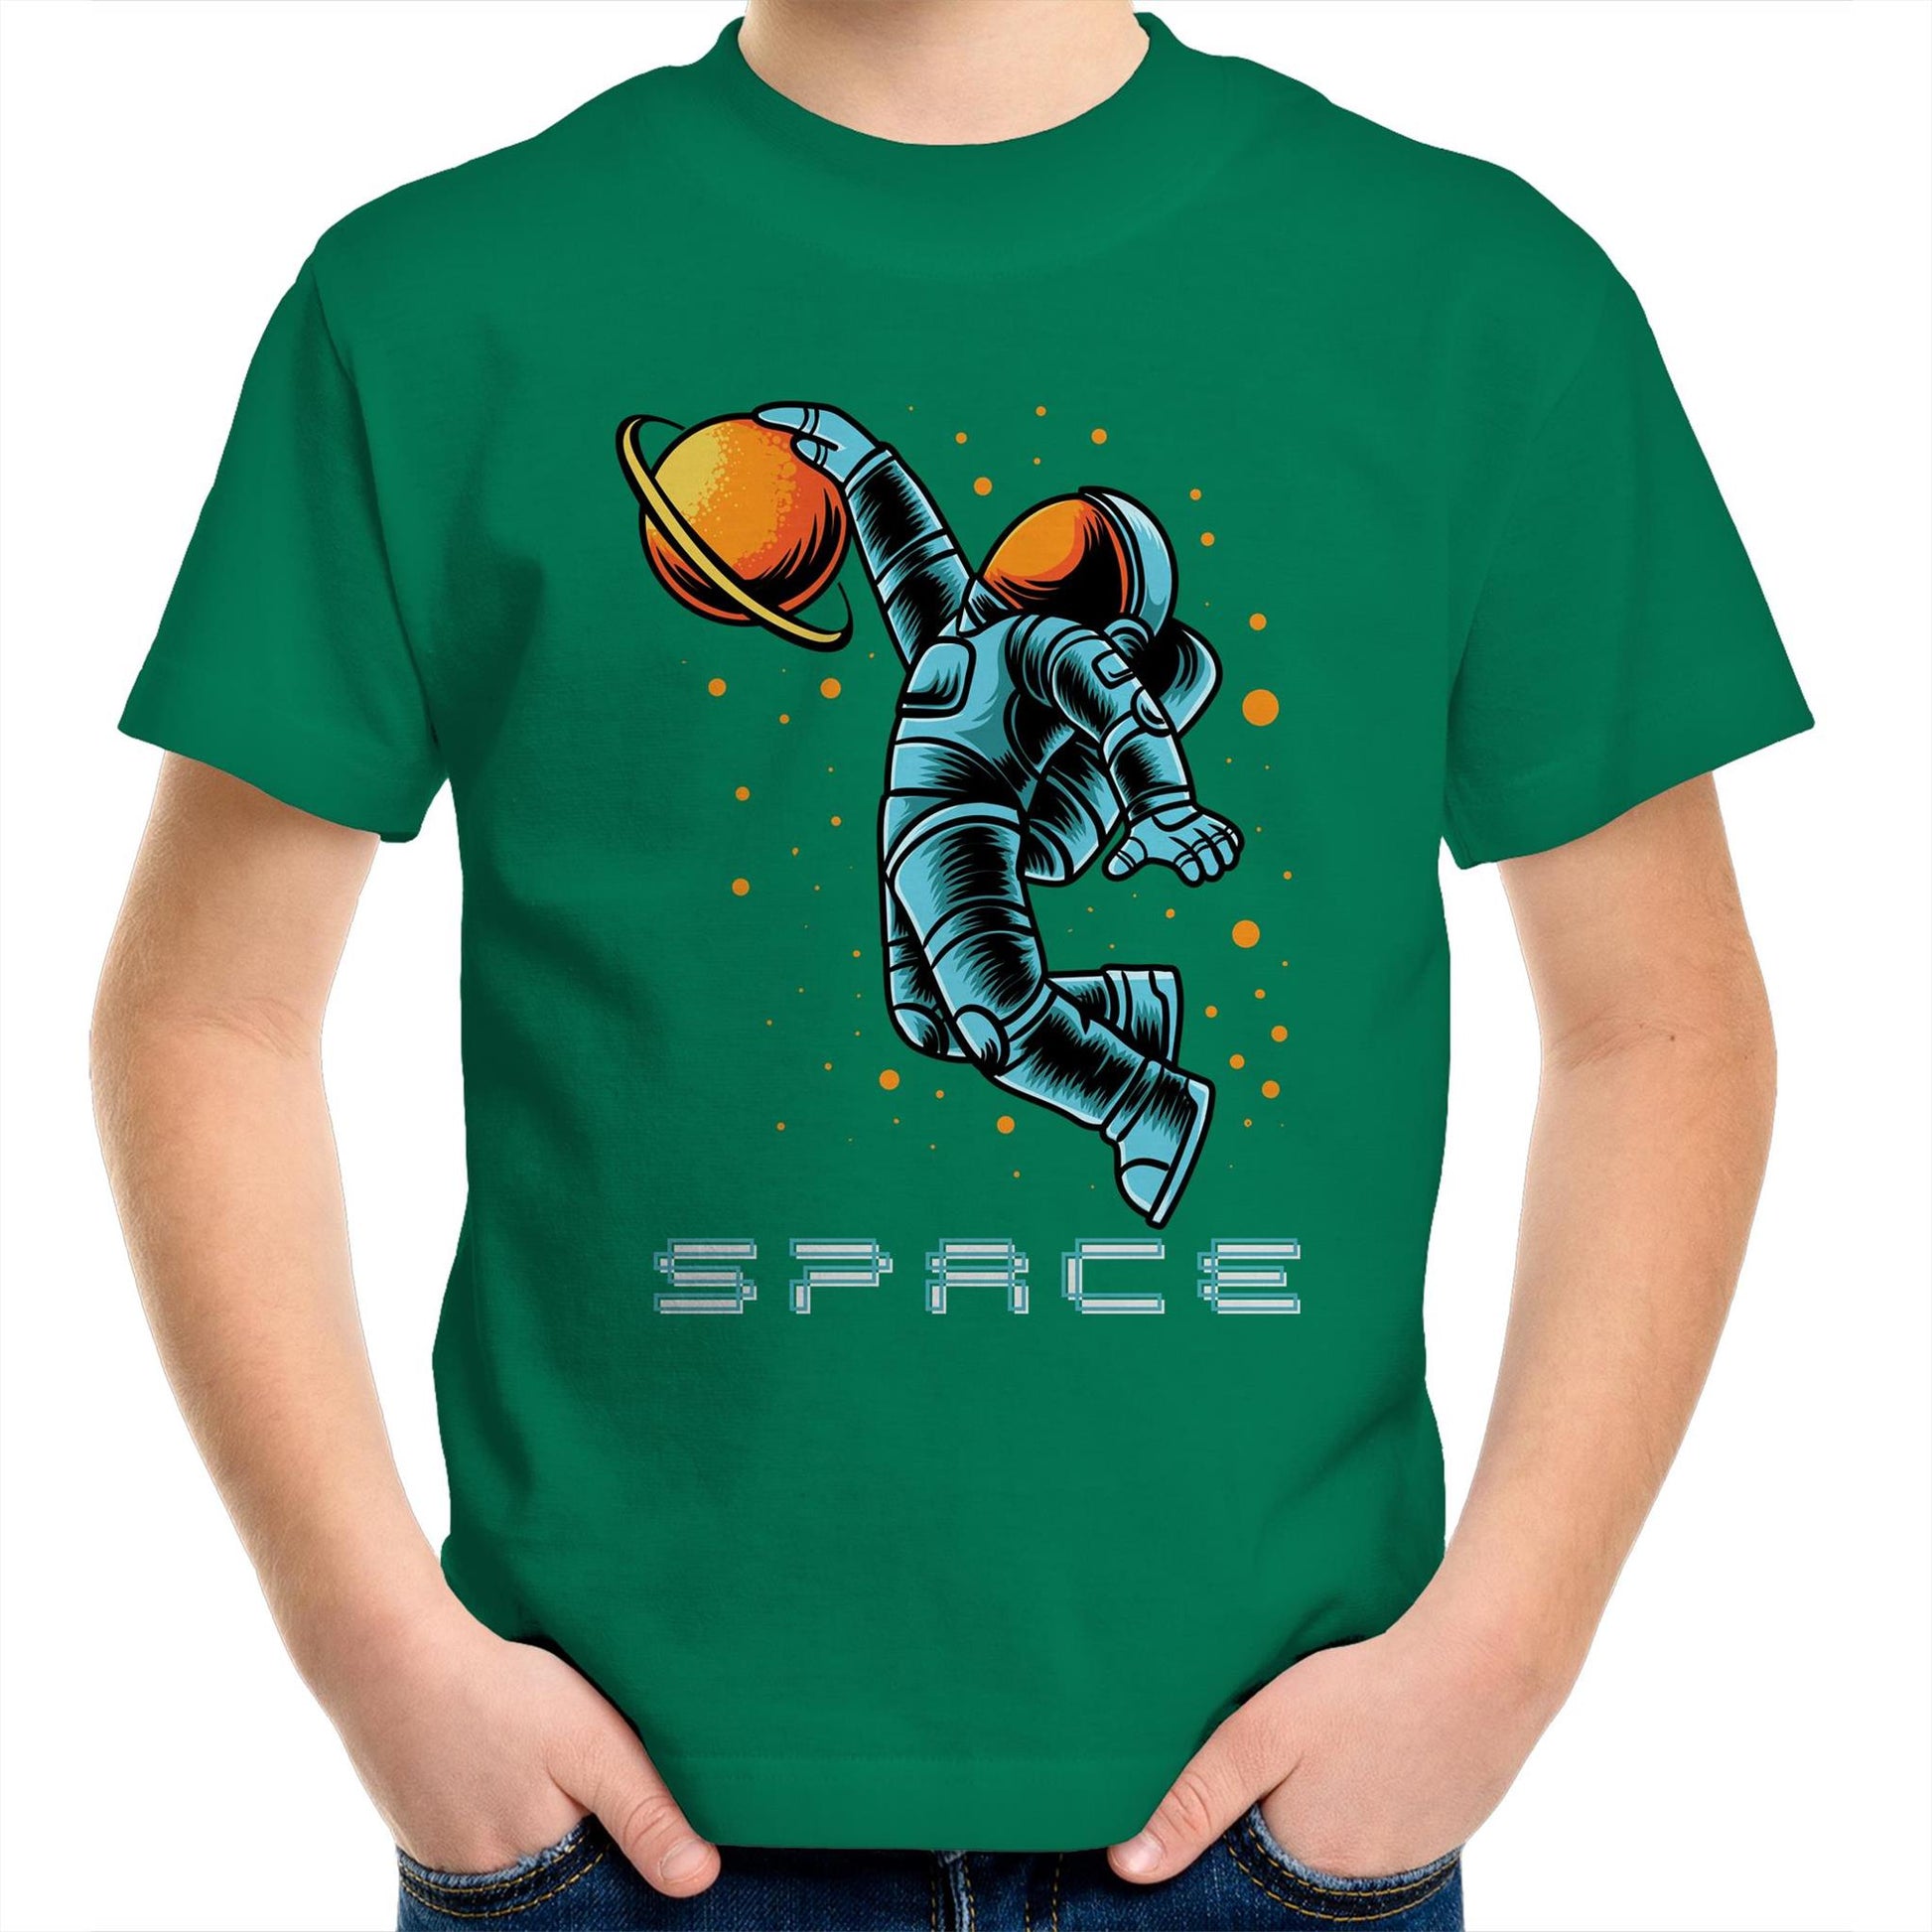 Astronaut Basketball - Kids Youth Crew T-Shirt Kelly Green Kids Youth T-shirt Space